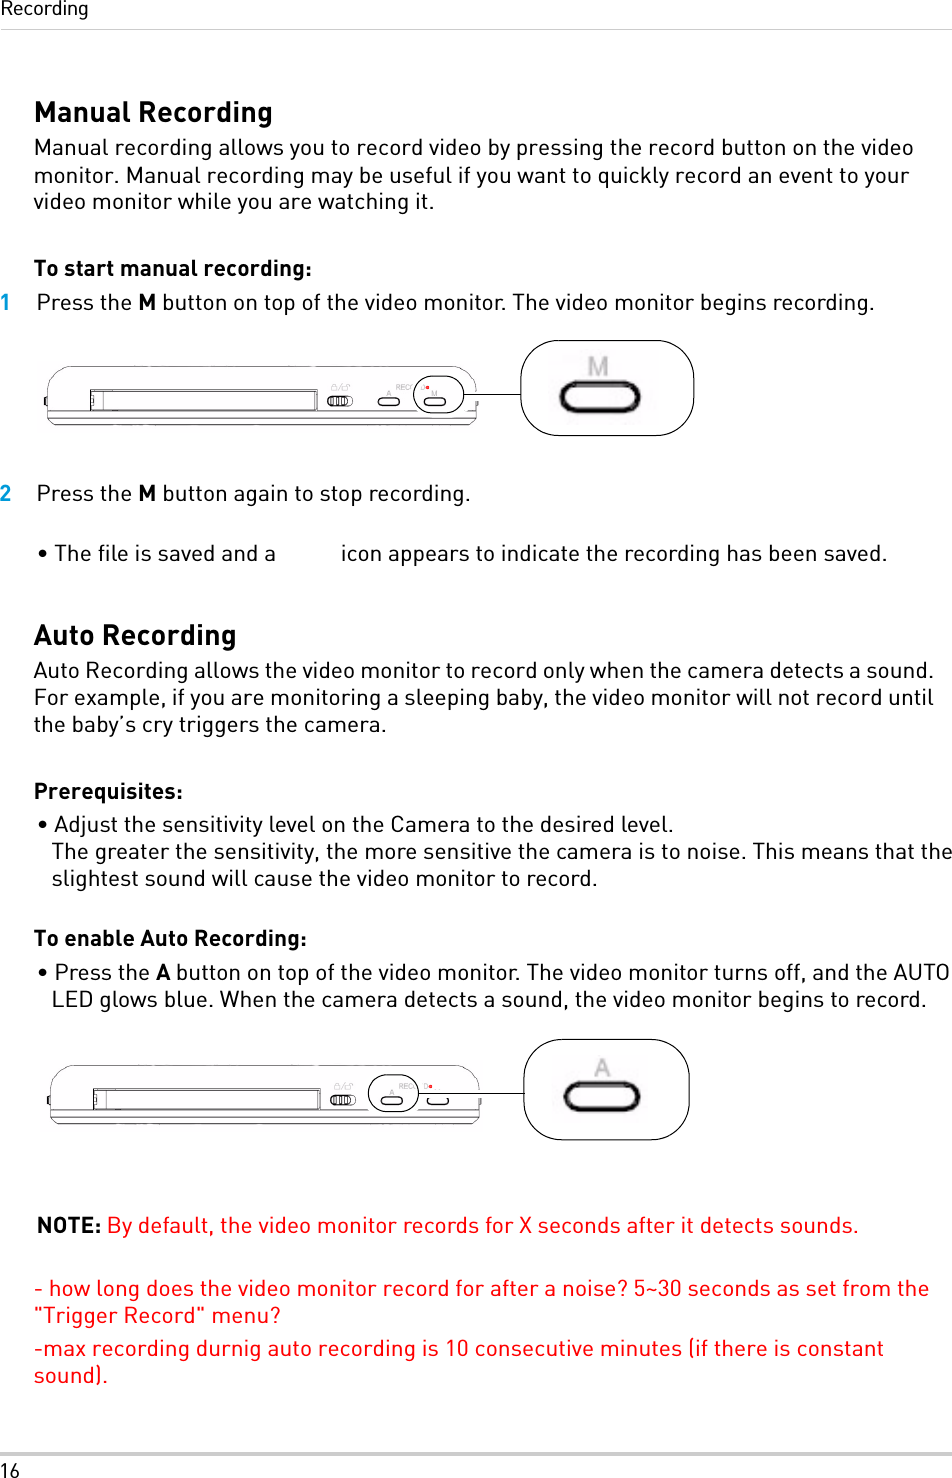 16RecordingManual RecordingManual recording allows you to record video by pressing the record button on the video monitor. Manual recording may be useful if you want to quickly record an event to your video monitor while you are watching it.To start manual recording:1Press the M button on top of the video monitor. The video monitor begins recording.2Press the M button again to stop recording. • The file is saved and a   icon appears to indicate the recording has been saved.Auto RecordingAuto Recording allows the video monitor to record only when the camera detects a sound. For example, if you are monitoring a sleeping baby, the video monitor will not record until the baby’s cry triggers the camera. Prerequisites:• Adjust the sensitivity level on the Camera to the desired level.  The greater the sensitivity, the more sensitive the camera is to noise. This means that the slightest sound will cause the video monitor to record. To enable Auto Recording:• Press the A button on top of the video monitor. The video monitor turns off, and the AUTO LED glows blue. When the camera detects a sound, the video monitor begins to record.NOTE: By default, the video monitor records for X seconds after it detects sounds.- how long does the video monitor record for after a noise? 5~30 seconds as set from the &quot;Trigger Record&quot; menu?-max recording durnig auto recording is 10 consecutive minutes (if there is constant sound).